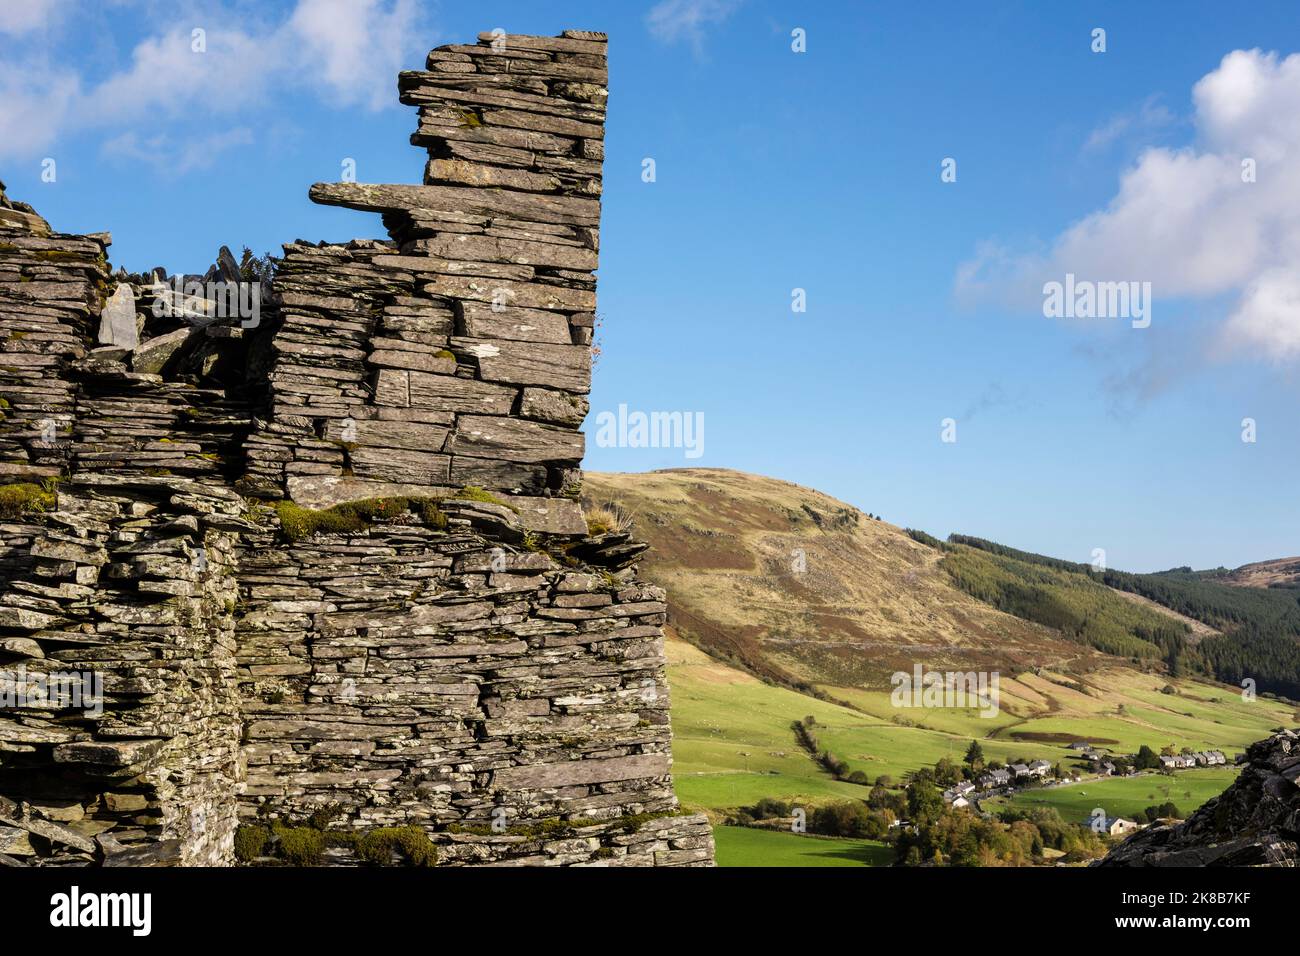 Old ruined building in disused Rhiw Fachno quarry with village in valley beyond. Cwm Penmachno, Betws-y-Coed, Conwy, north Wales, UK, Britain Stock Photo